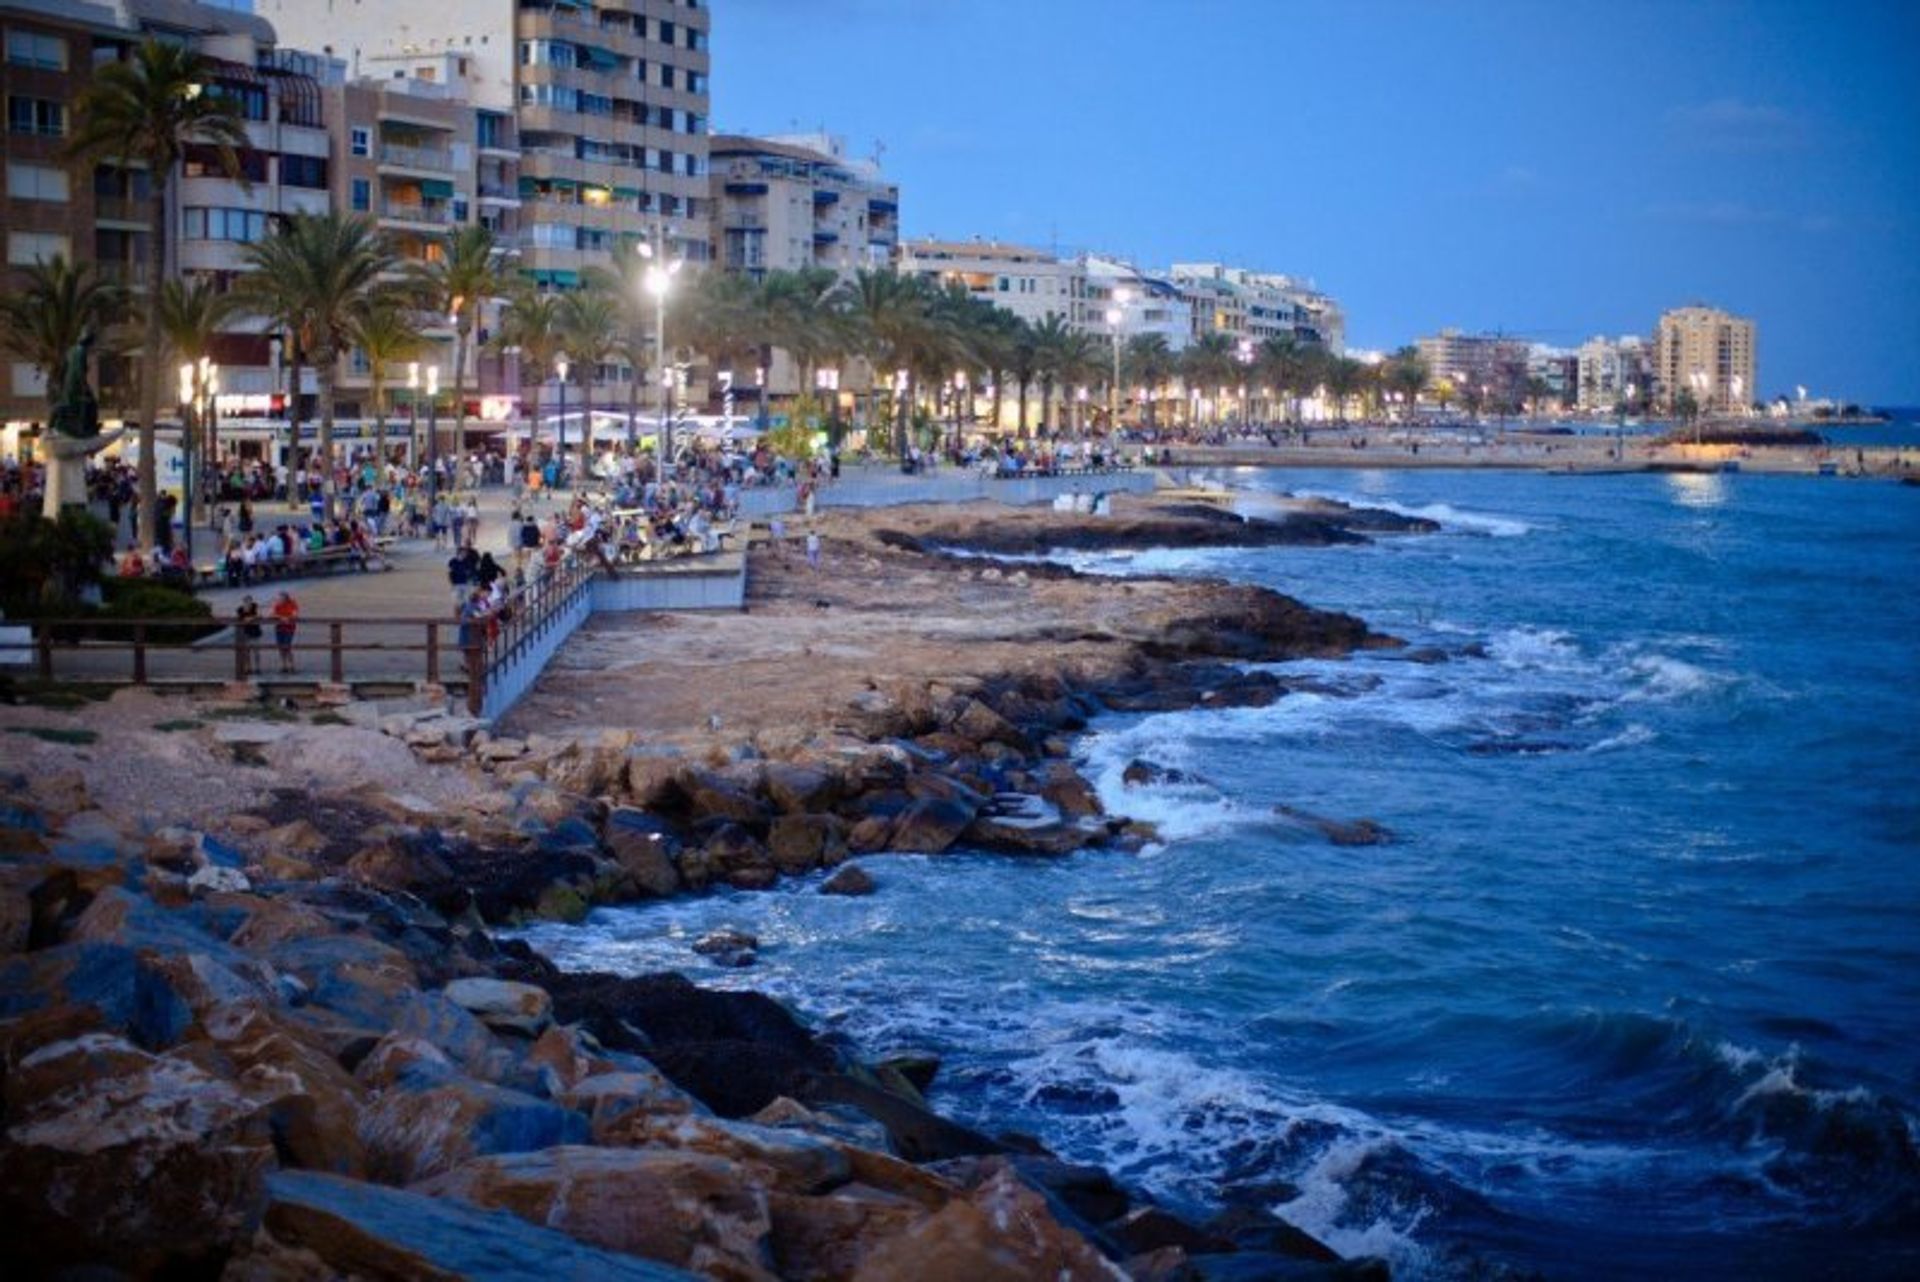 The promenades along the Costa Blanca's shoreline, come to life after sundown, with plenty of shops, bustling bars and restaurants